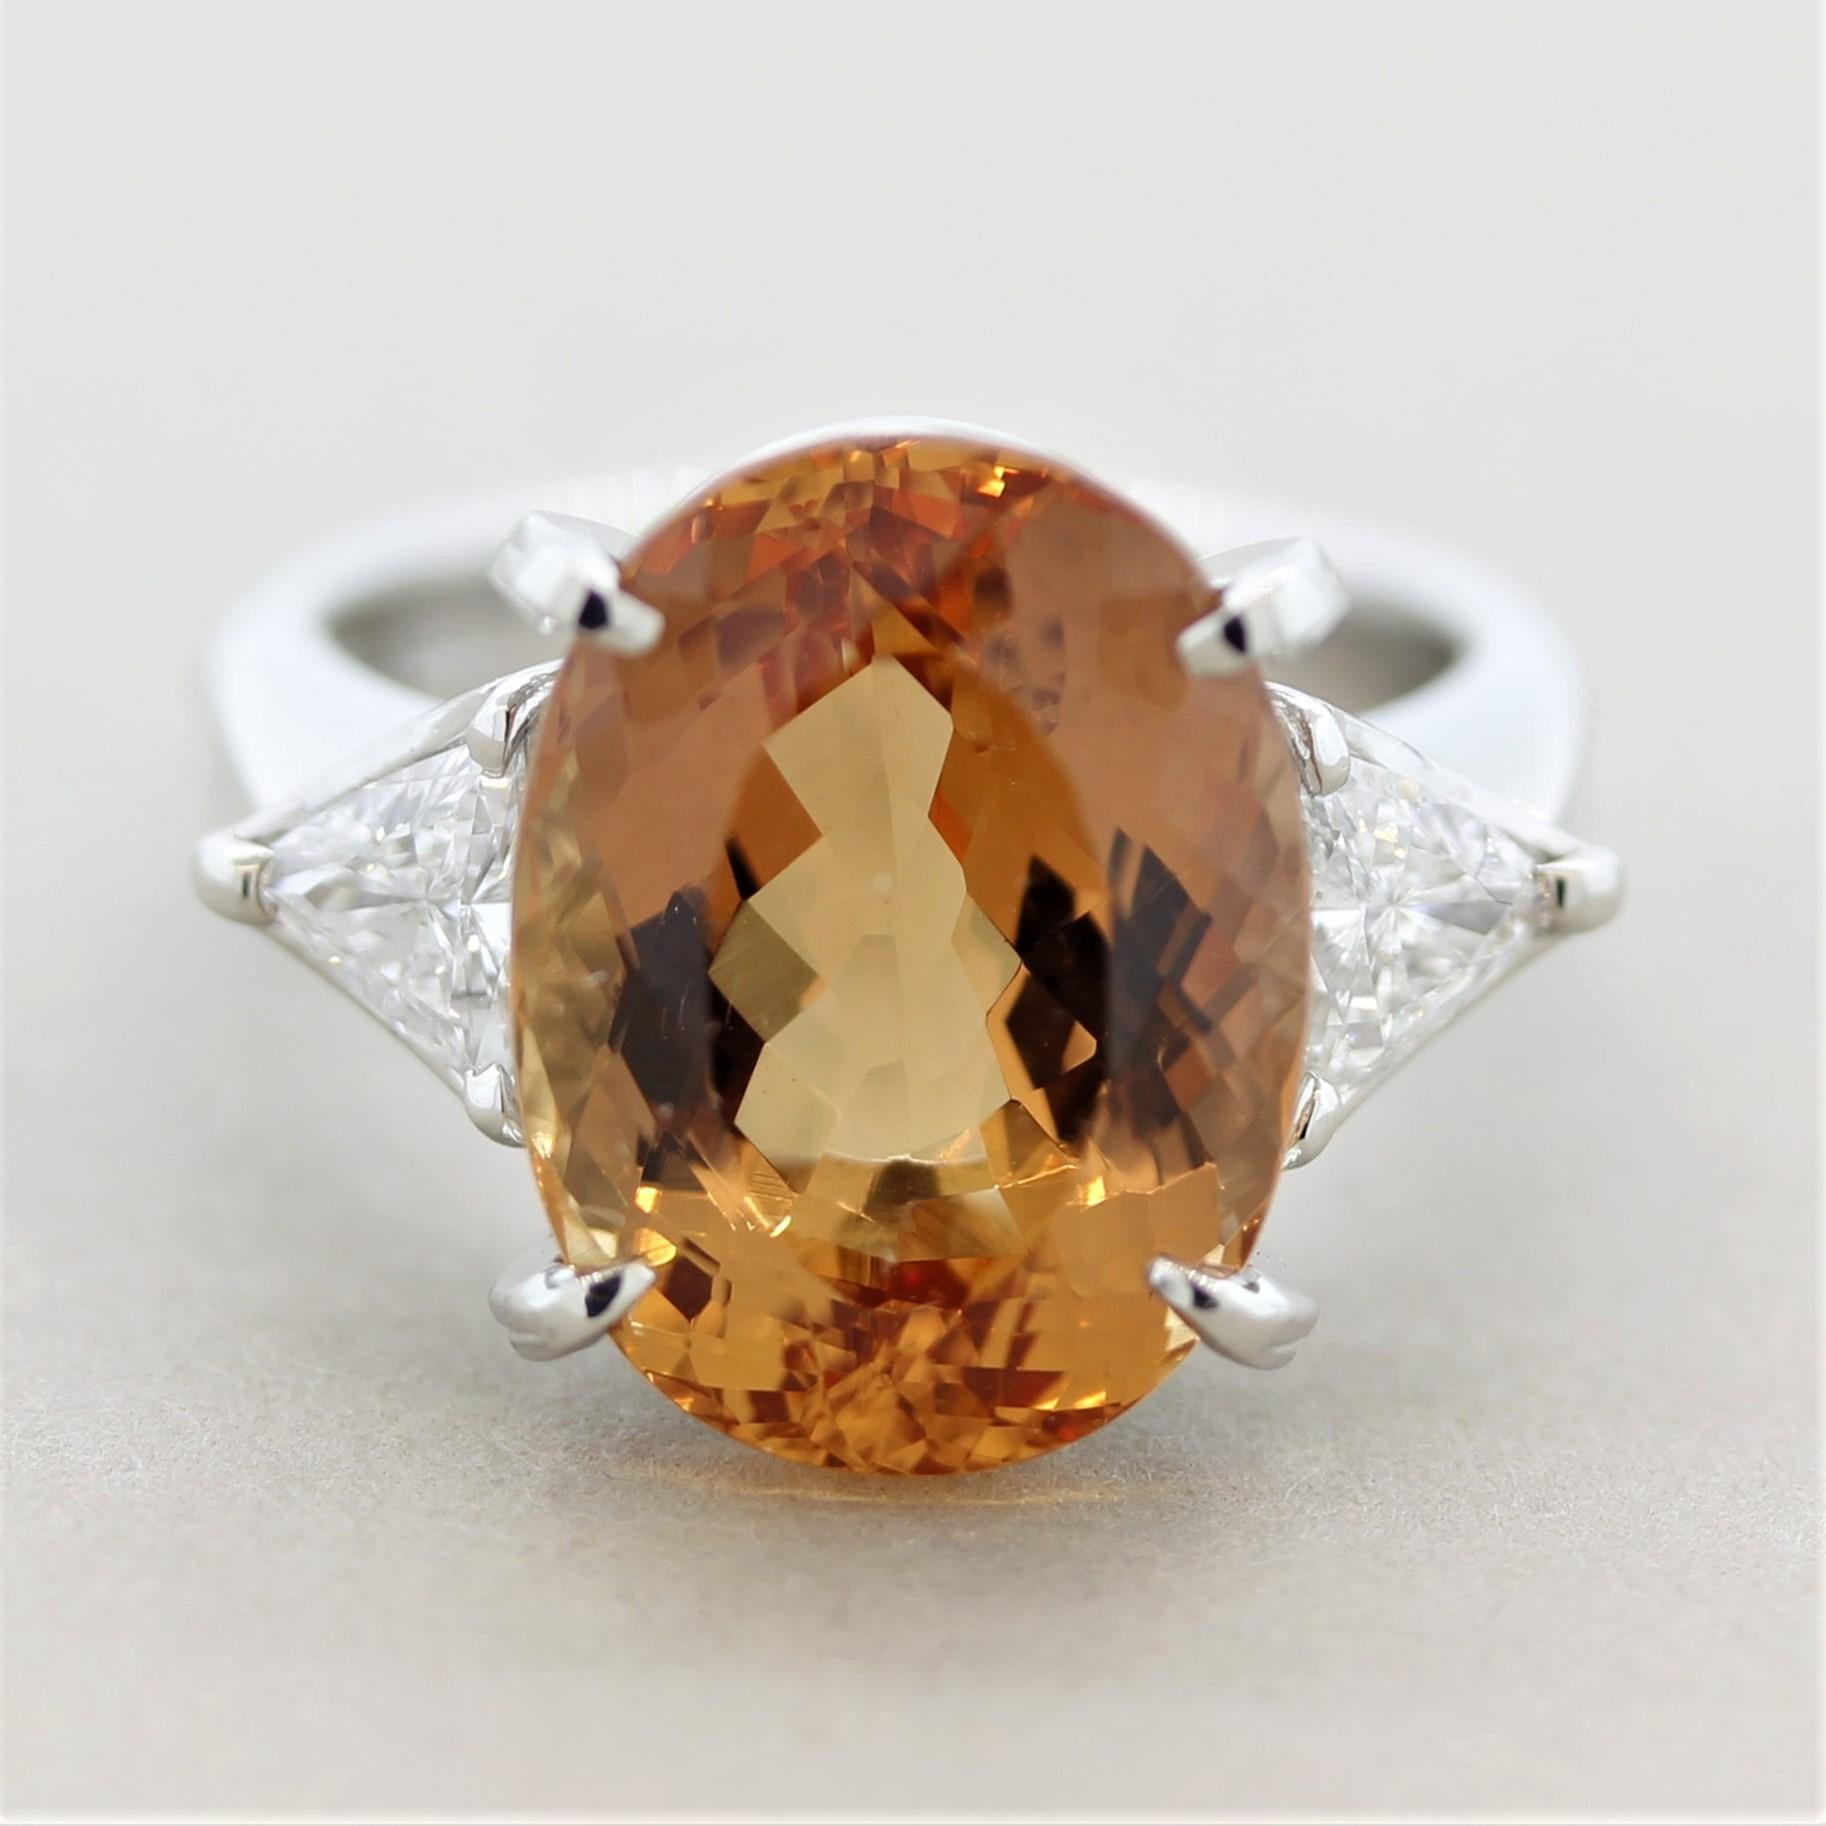 A superb crimson orangy-red topaz considered “imperial” in the trade due to its fine color. It weighs 10.86 carats and was expertly cut and polished as the stone has amazing brilliance and scintillation allowing for maximum light return. Accenting